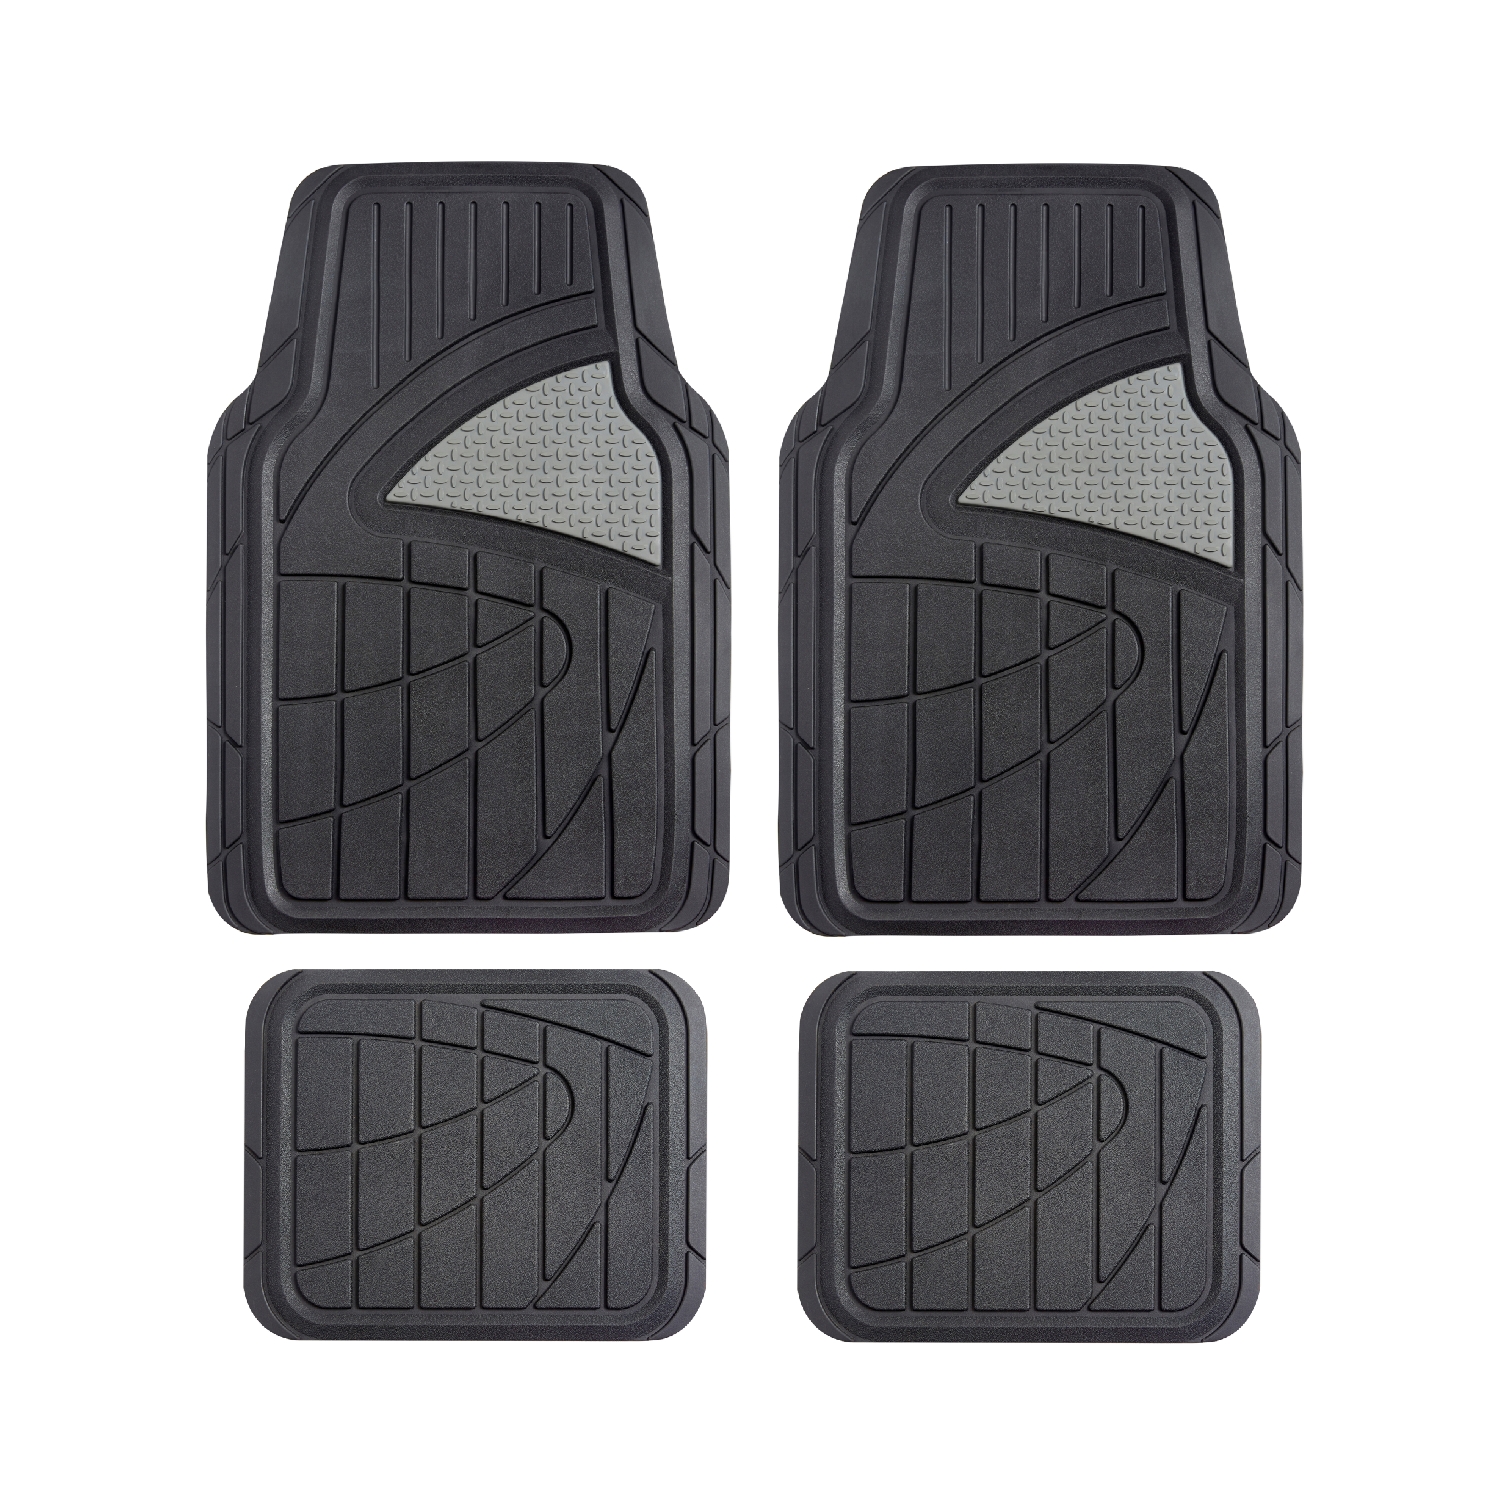 Protective & Versatile Boot Tray Mat: A Must-Have for Indoor and Outdoor Use!